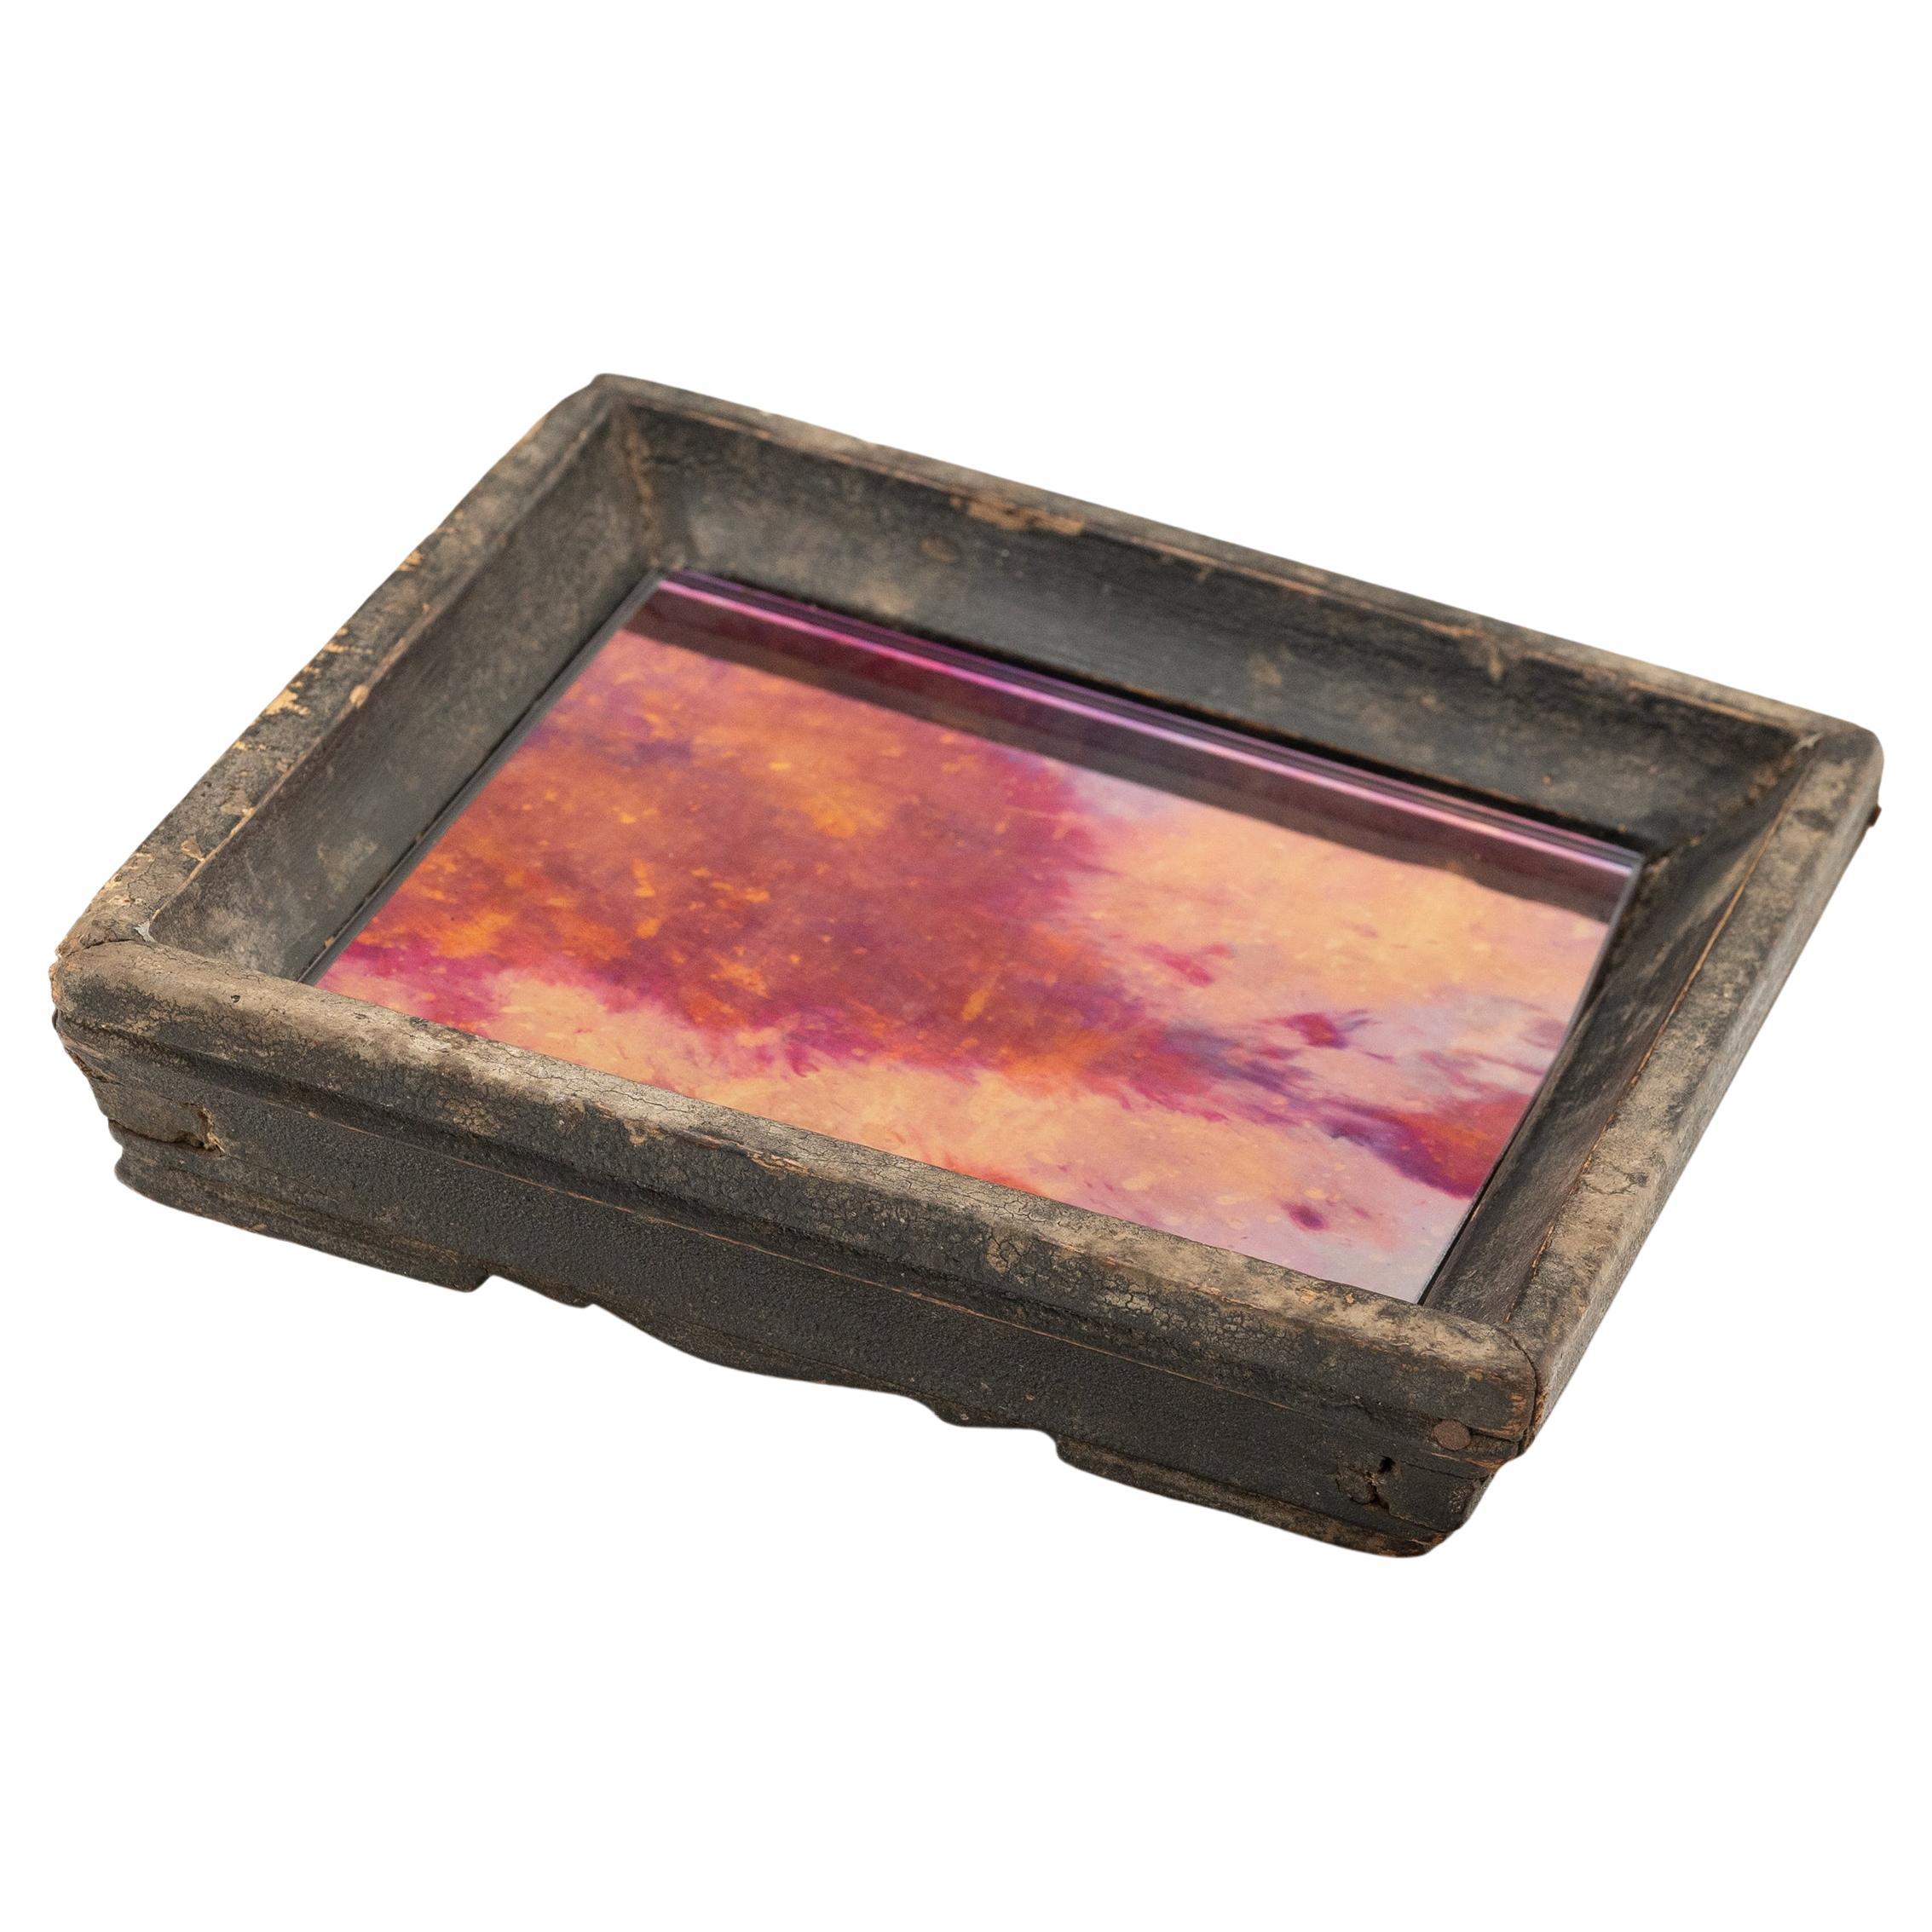 Petite Chinese Tray with Rose Mirror, c. 1900